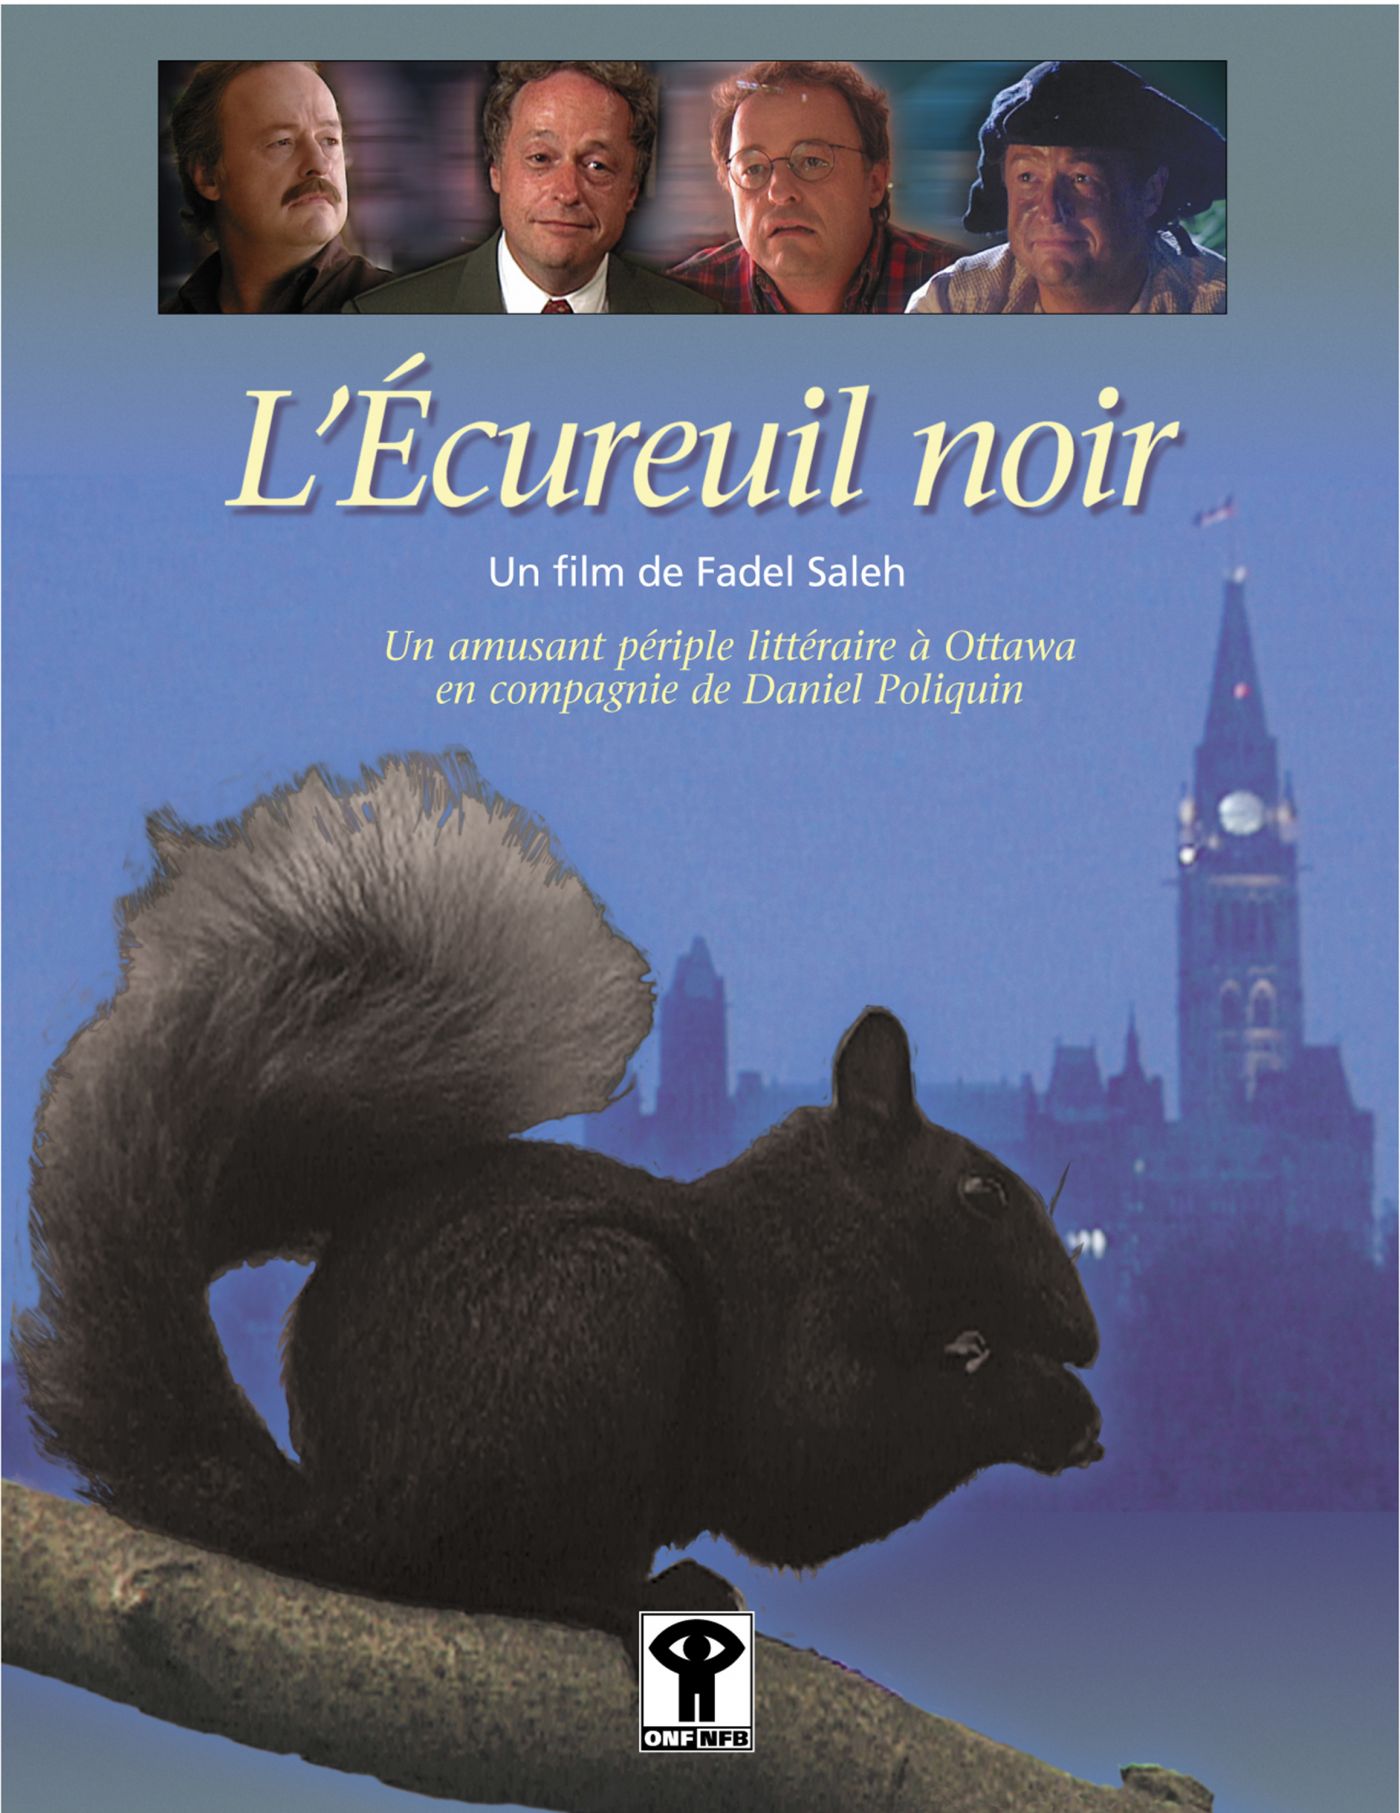 French poster. On a blue backdrop, a black squirrel on a branch, the Parliament of Canada building in the background. The movie’s title as well as the director’s name, are also featured. At the very top of the image, photographs of four characters played by the same actor.